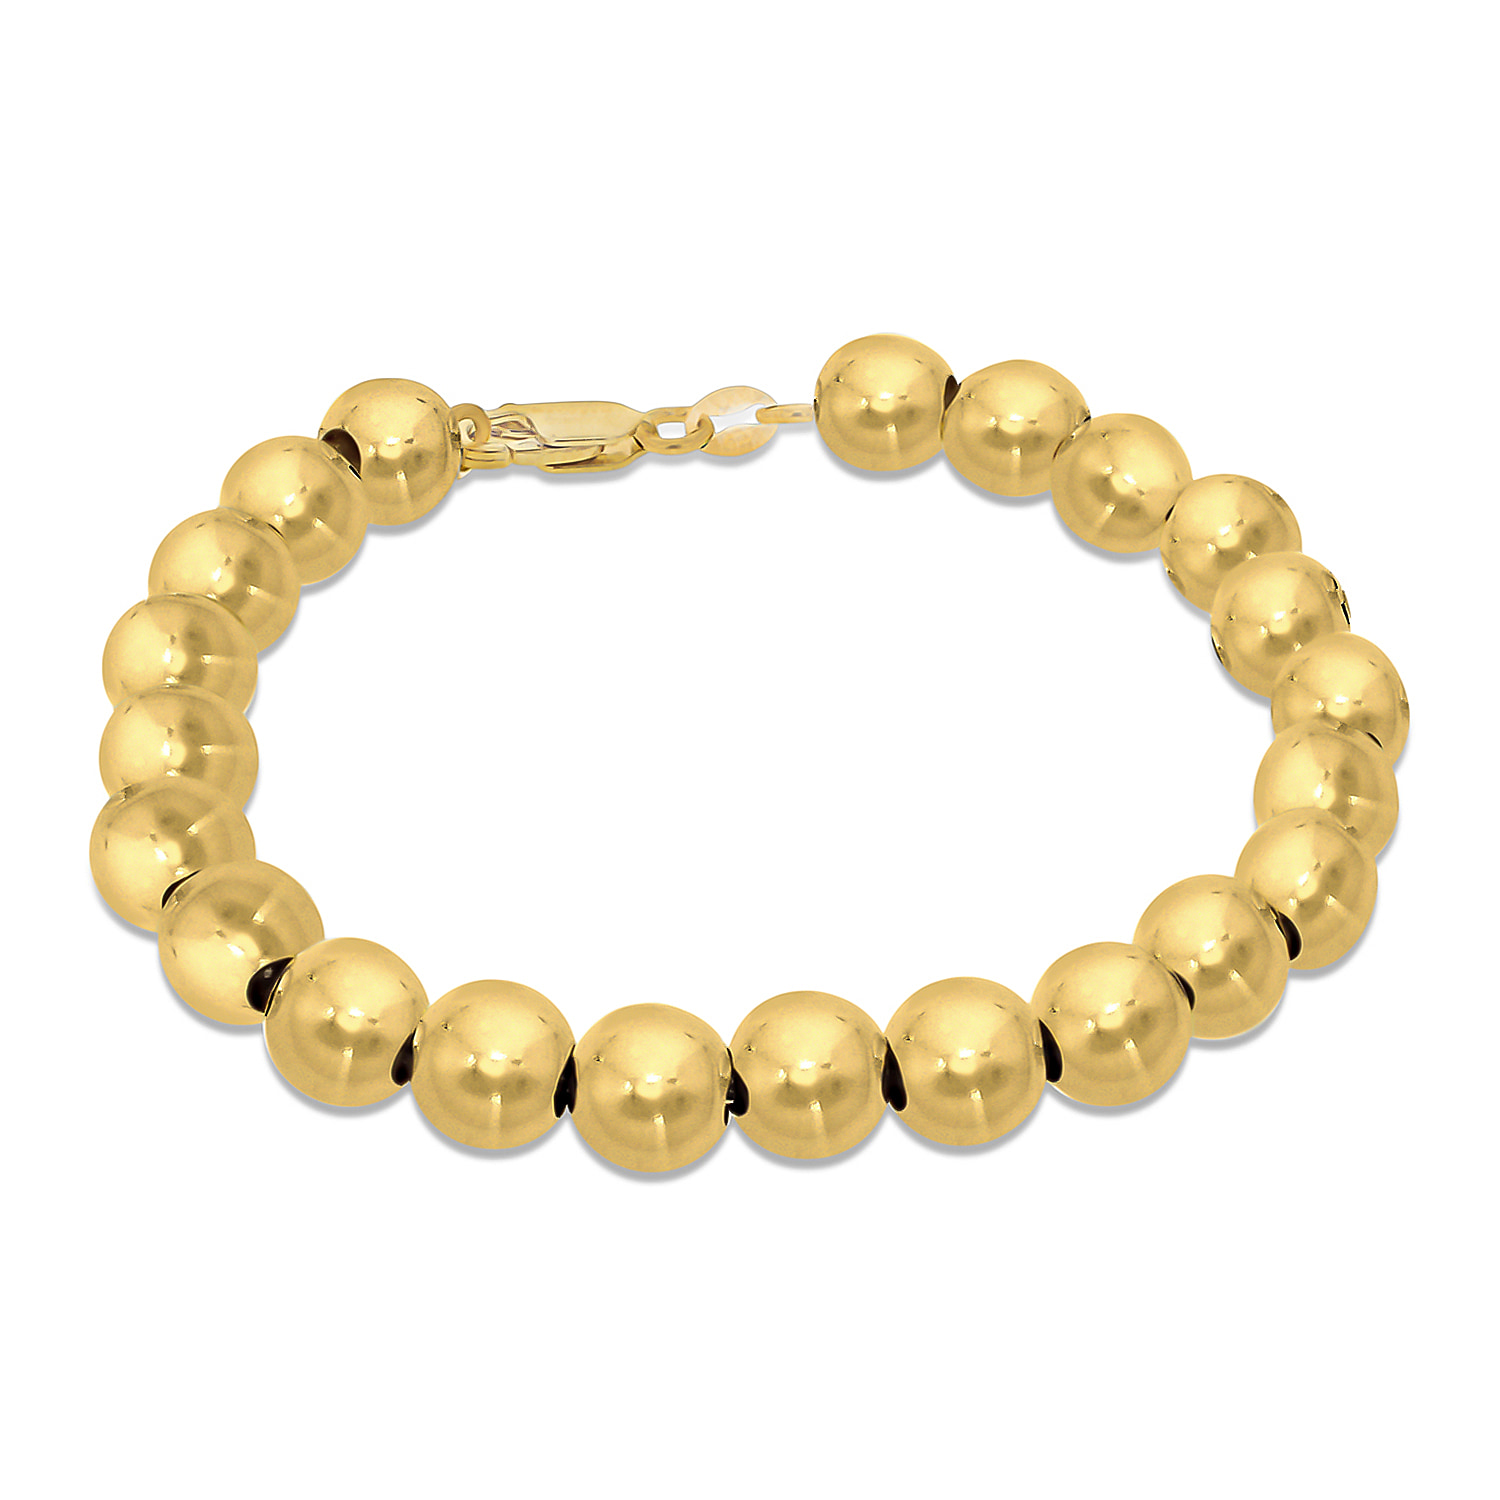 Gerry Browne Gold 9ct Gold Bead Bracelet - Jewellery from Gerry Browne  Jewellers UK